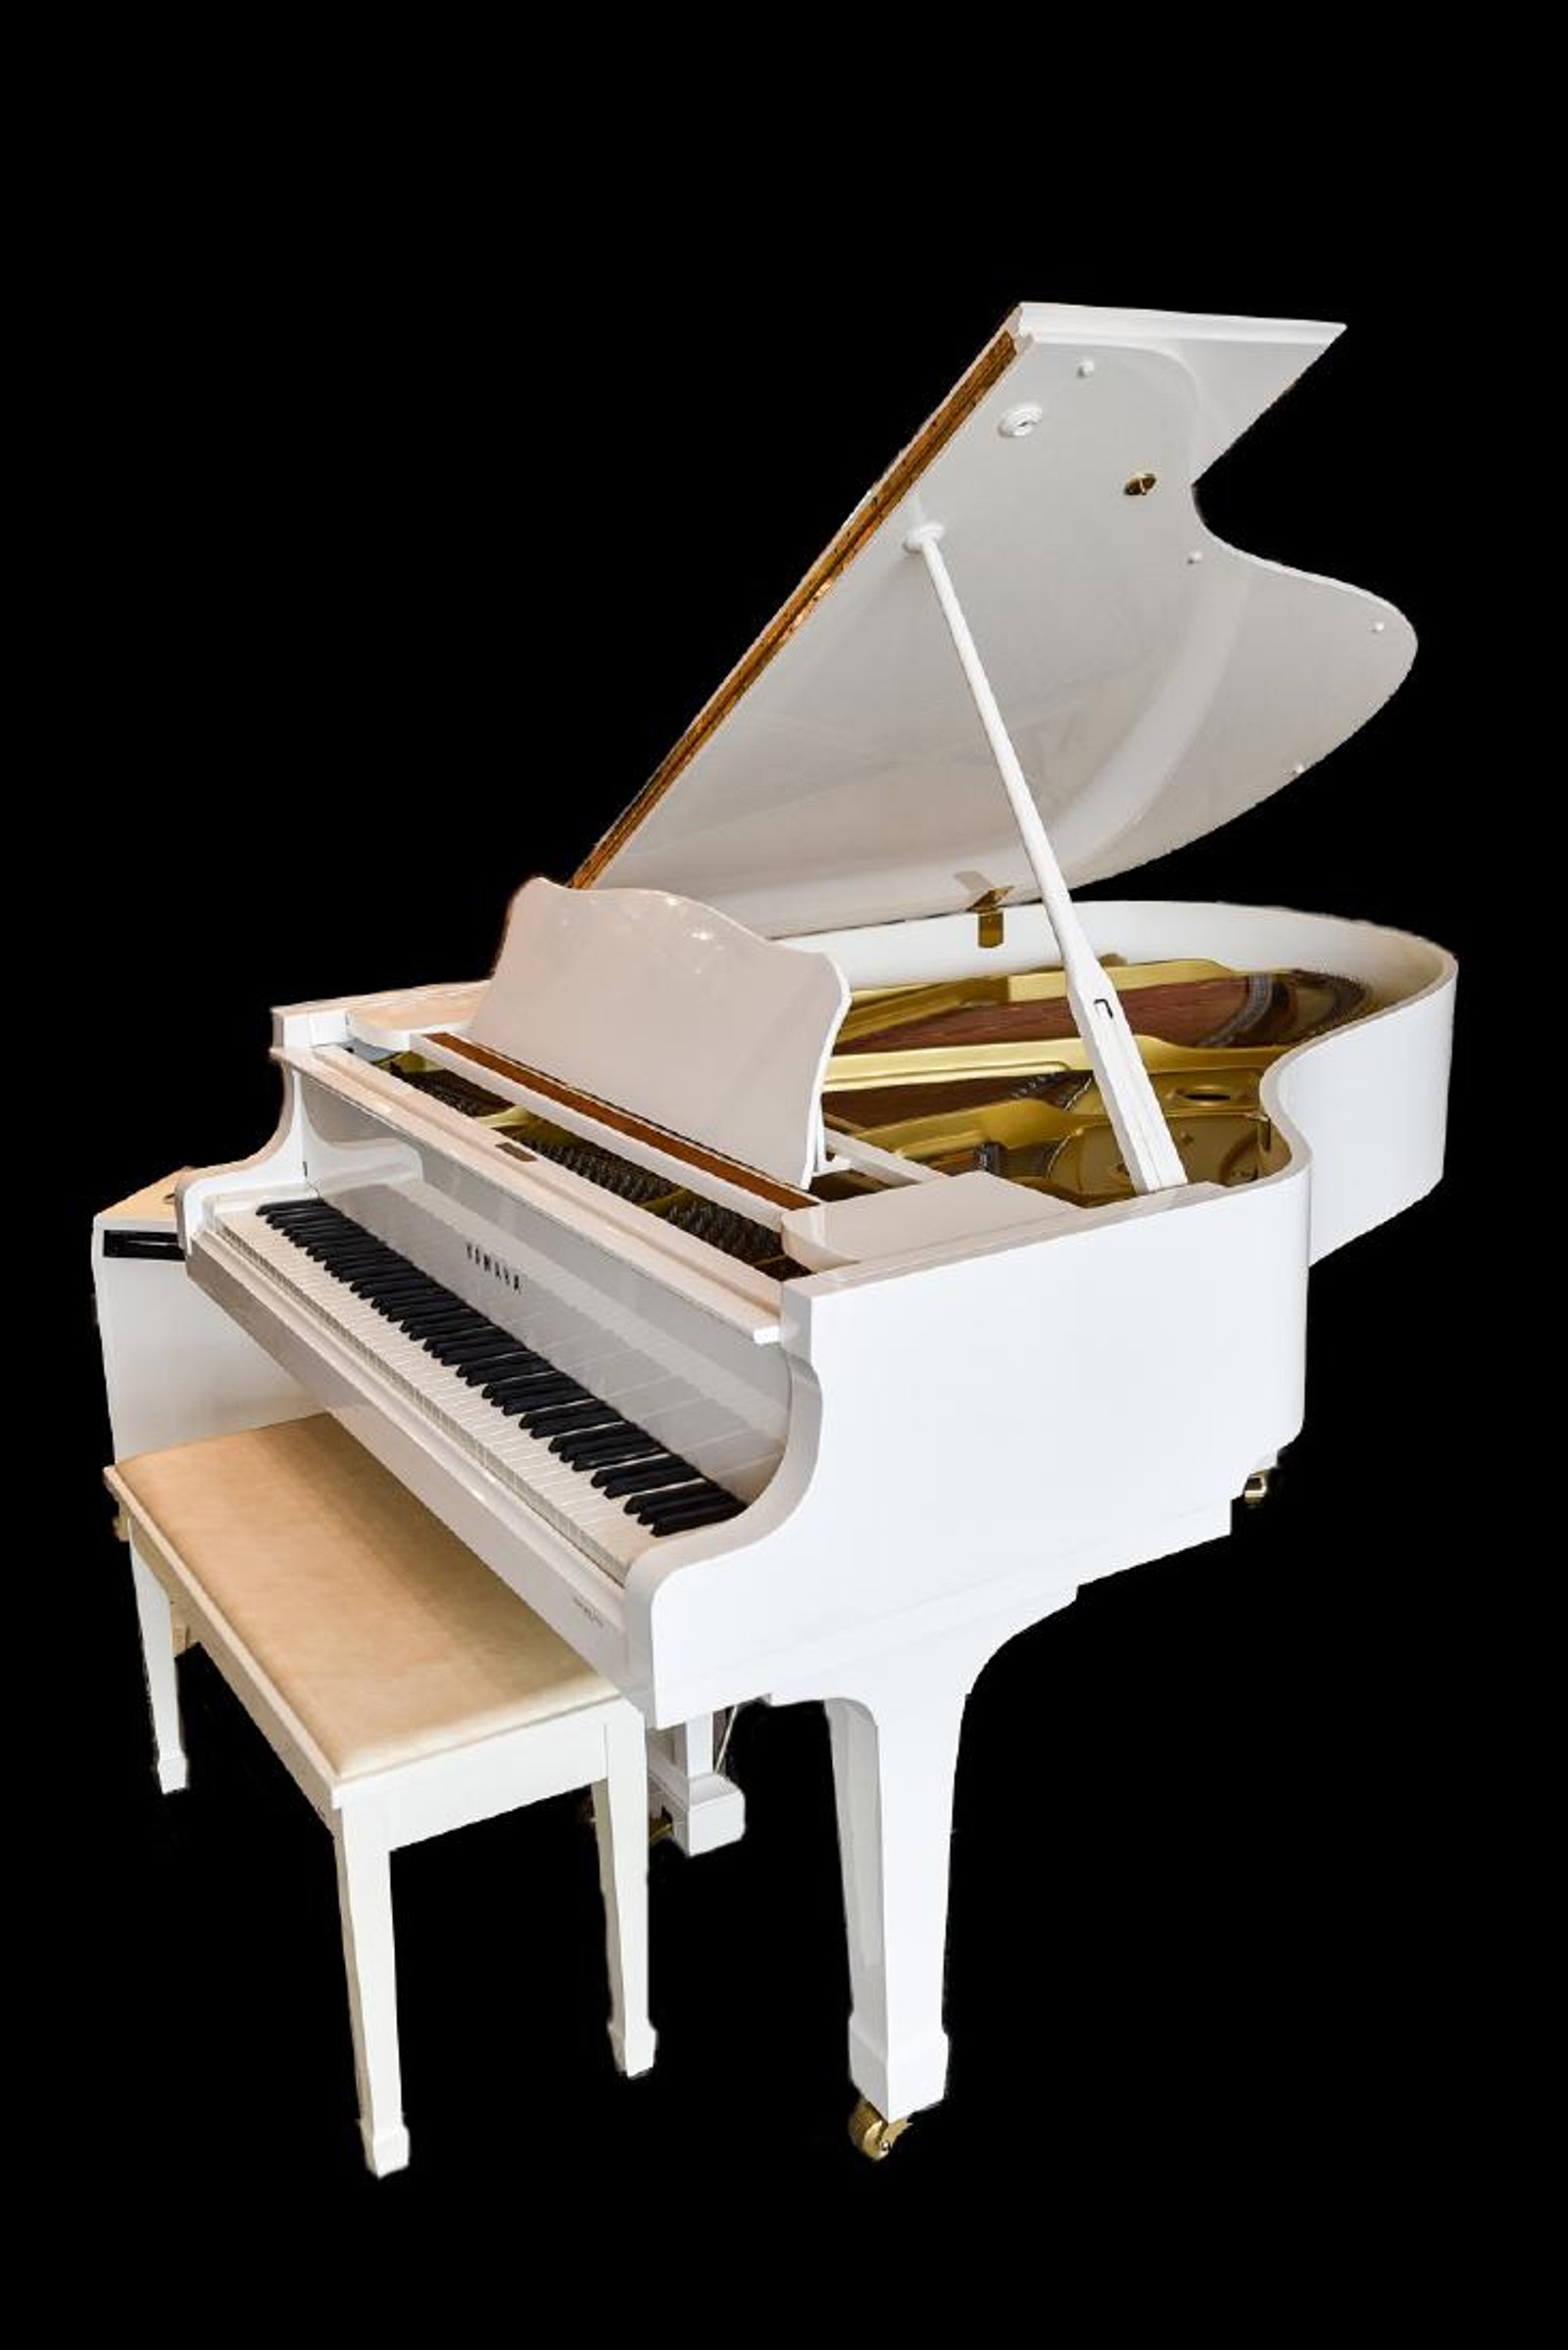 Deviate Pouch window Yamaha Disklavier Pianos For Sale | Like-New & Gently Used